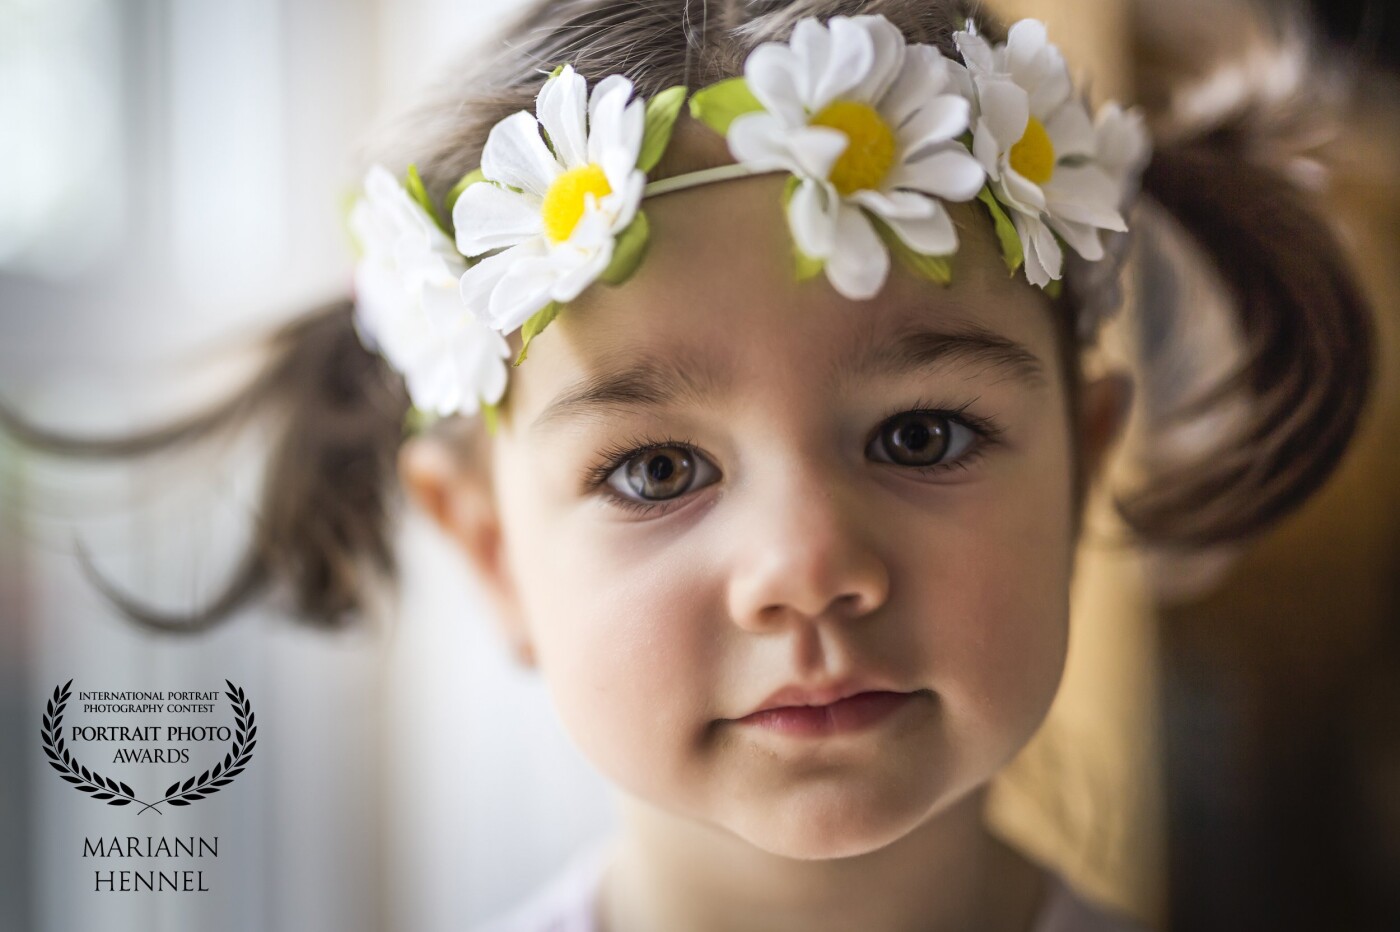 I took this photo in a break of a newborn session. This little beauty was so curious about what I was doing.<br />
(My model was originally her baby brother.) I found this flower headband in her staff,  put on her and asked to look at the camera.